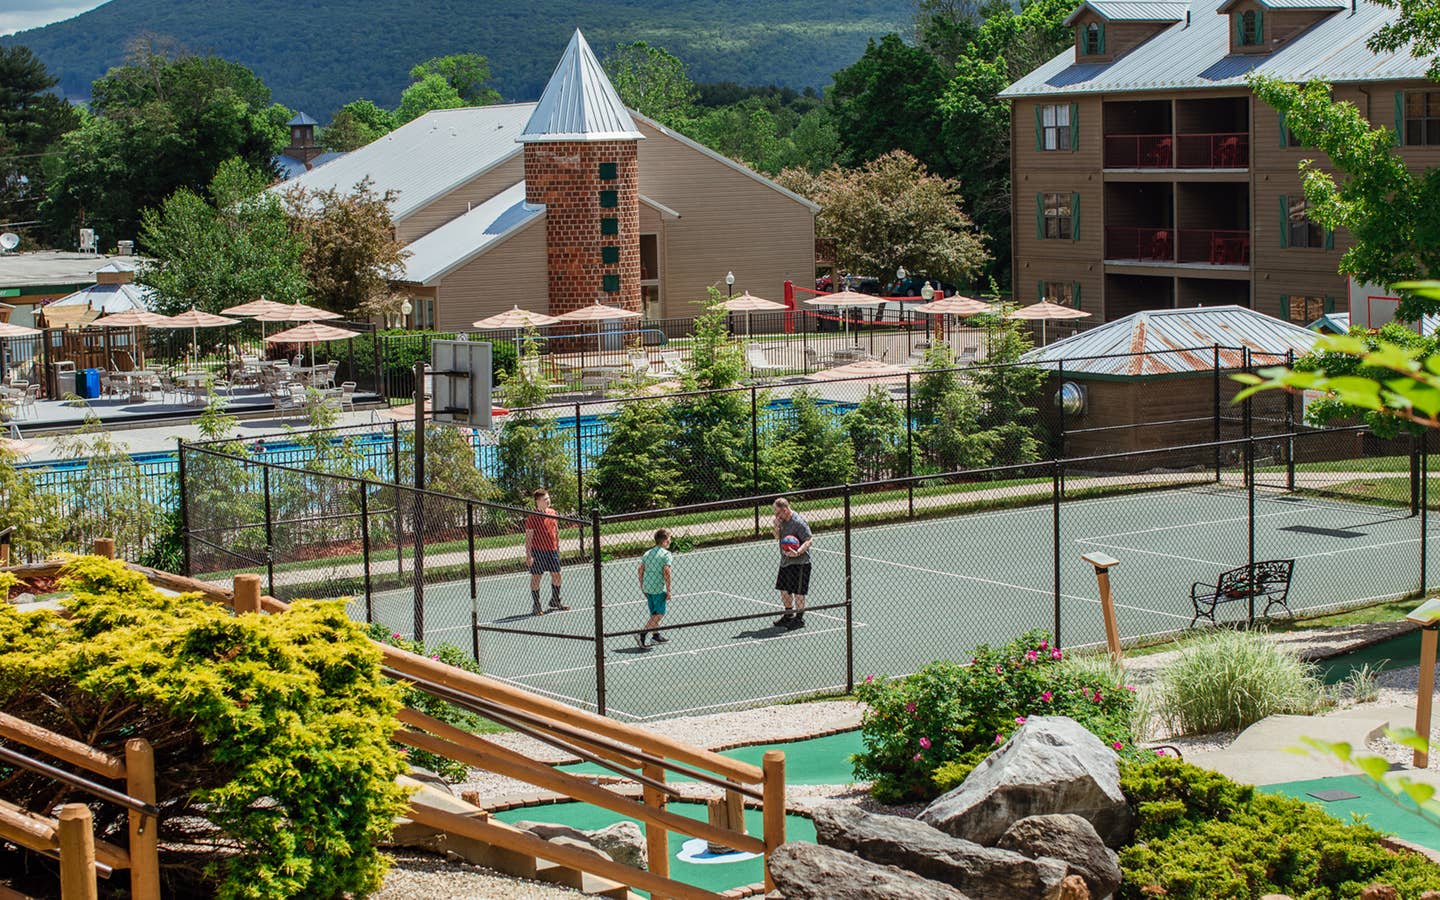 Family playing basketball on sports court at Oak n' Spruce Resort in South Lee, Massachusetts.